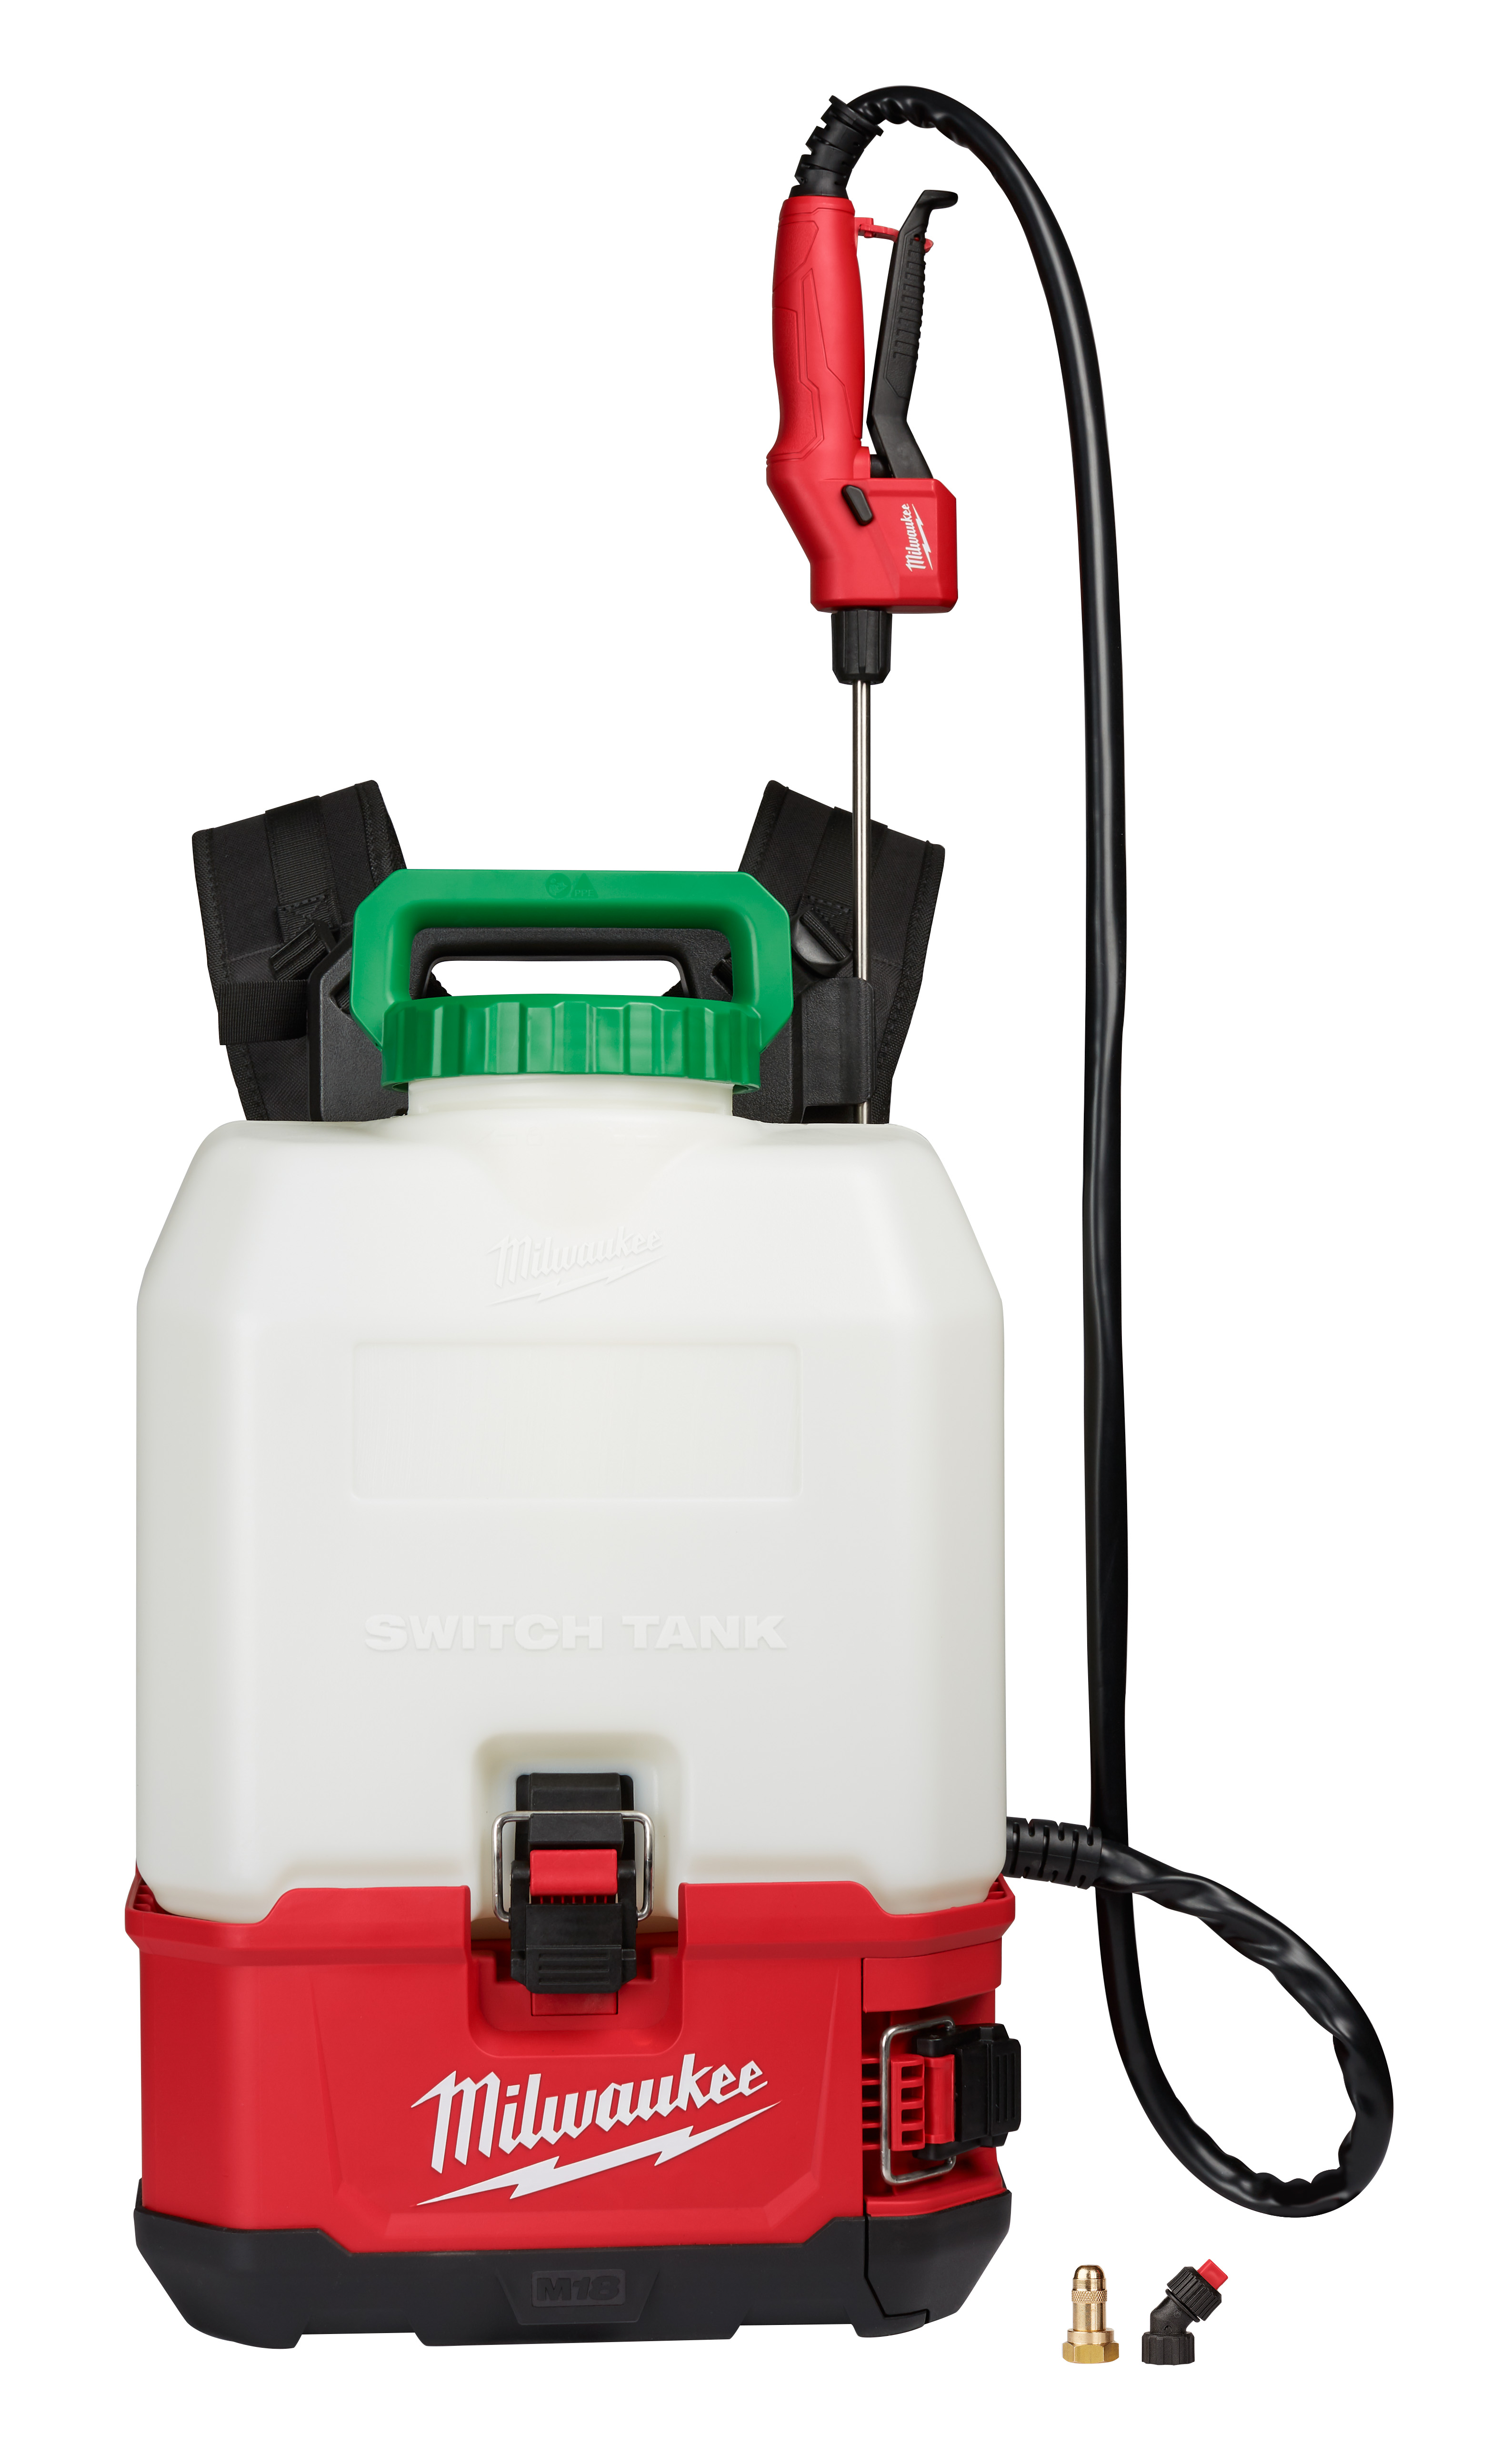 M18 18 Volt Lithium-Ion Cordless SWITCH TANK 4 Gallon Backpack Sprayer - Tool Only